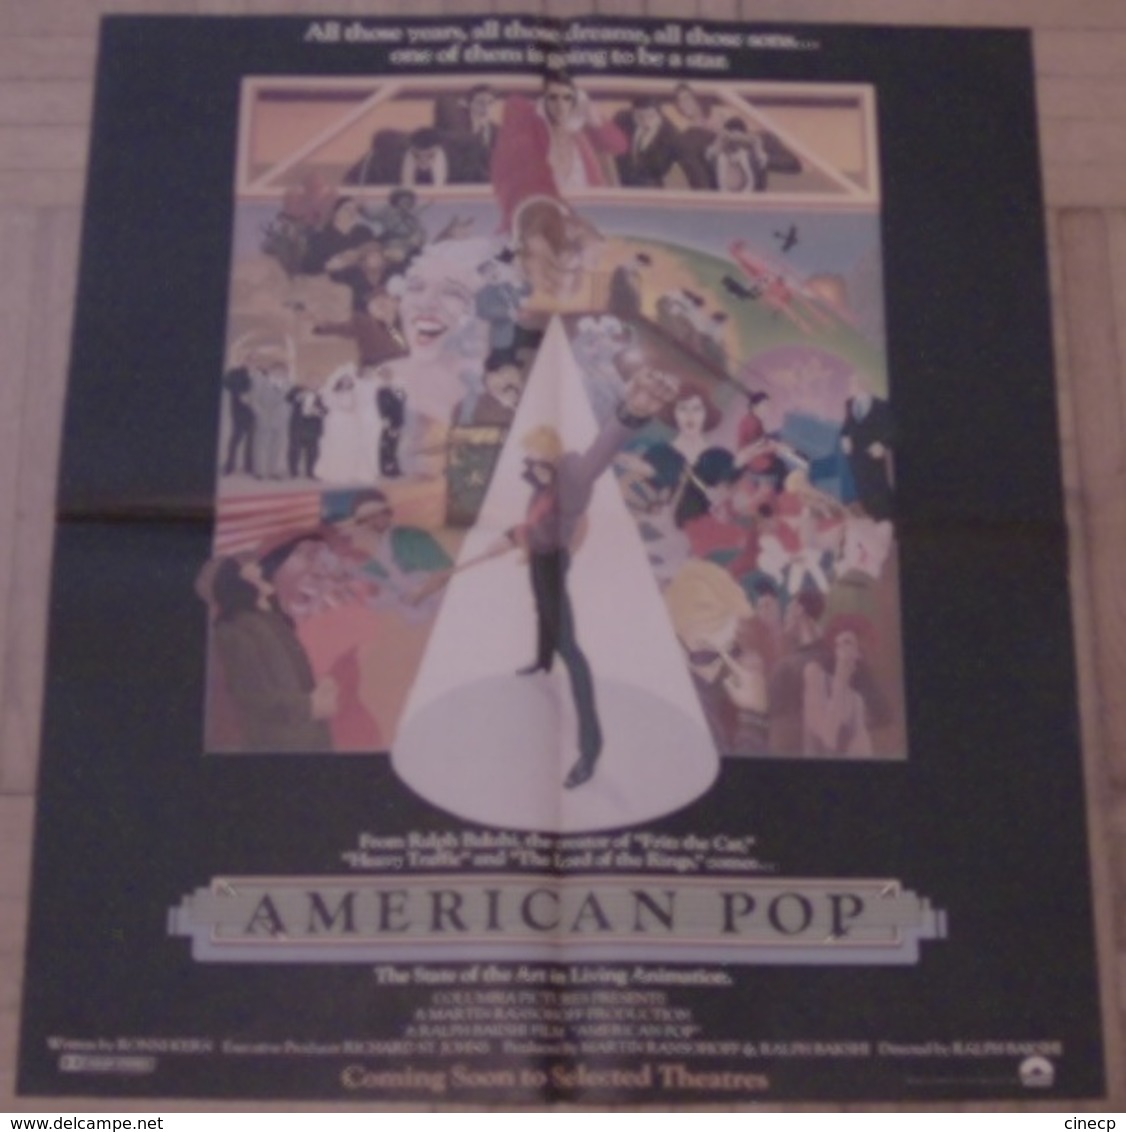 AFFICHE CINEMA FILM AMERICAN POP DESSIN ANIME JUDAICA MUSIQUE TBE 1981 AMERICAINE ? + Verso SYNOPSIS - Posters